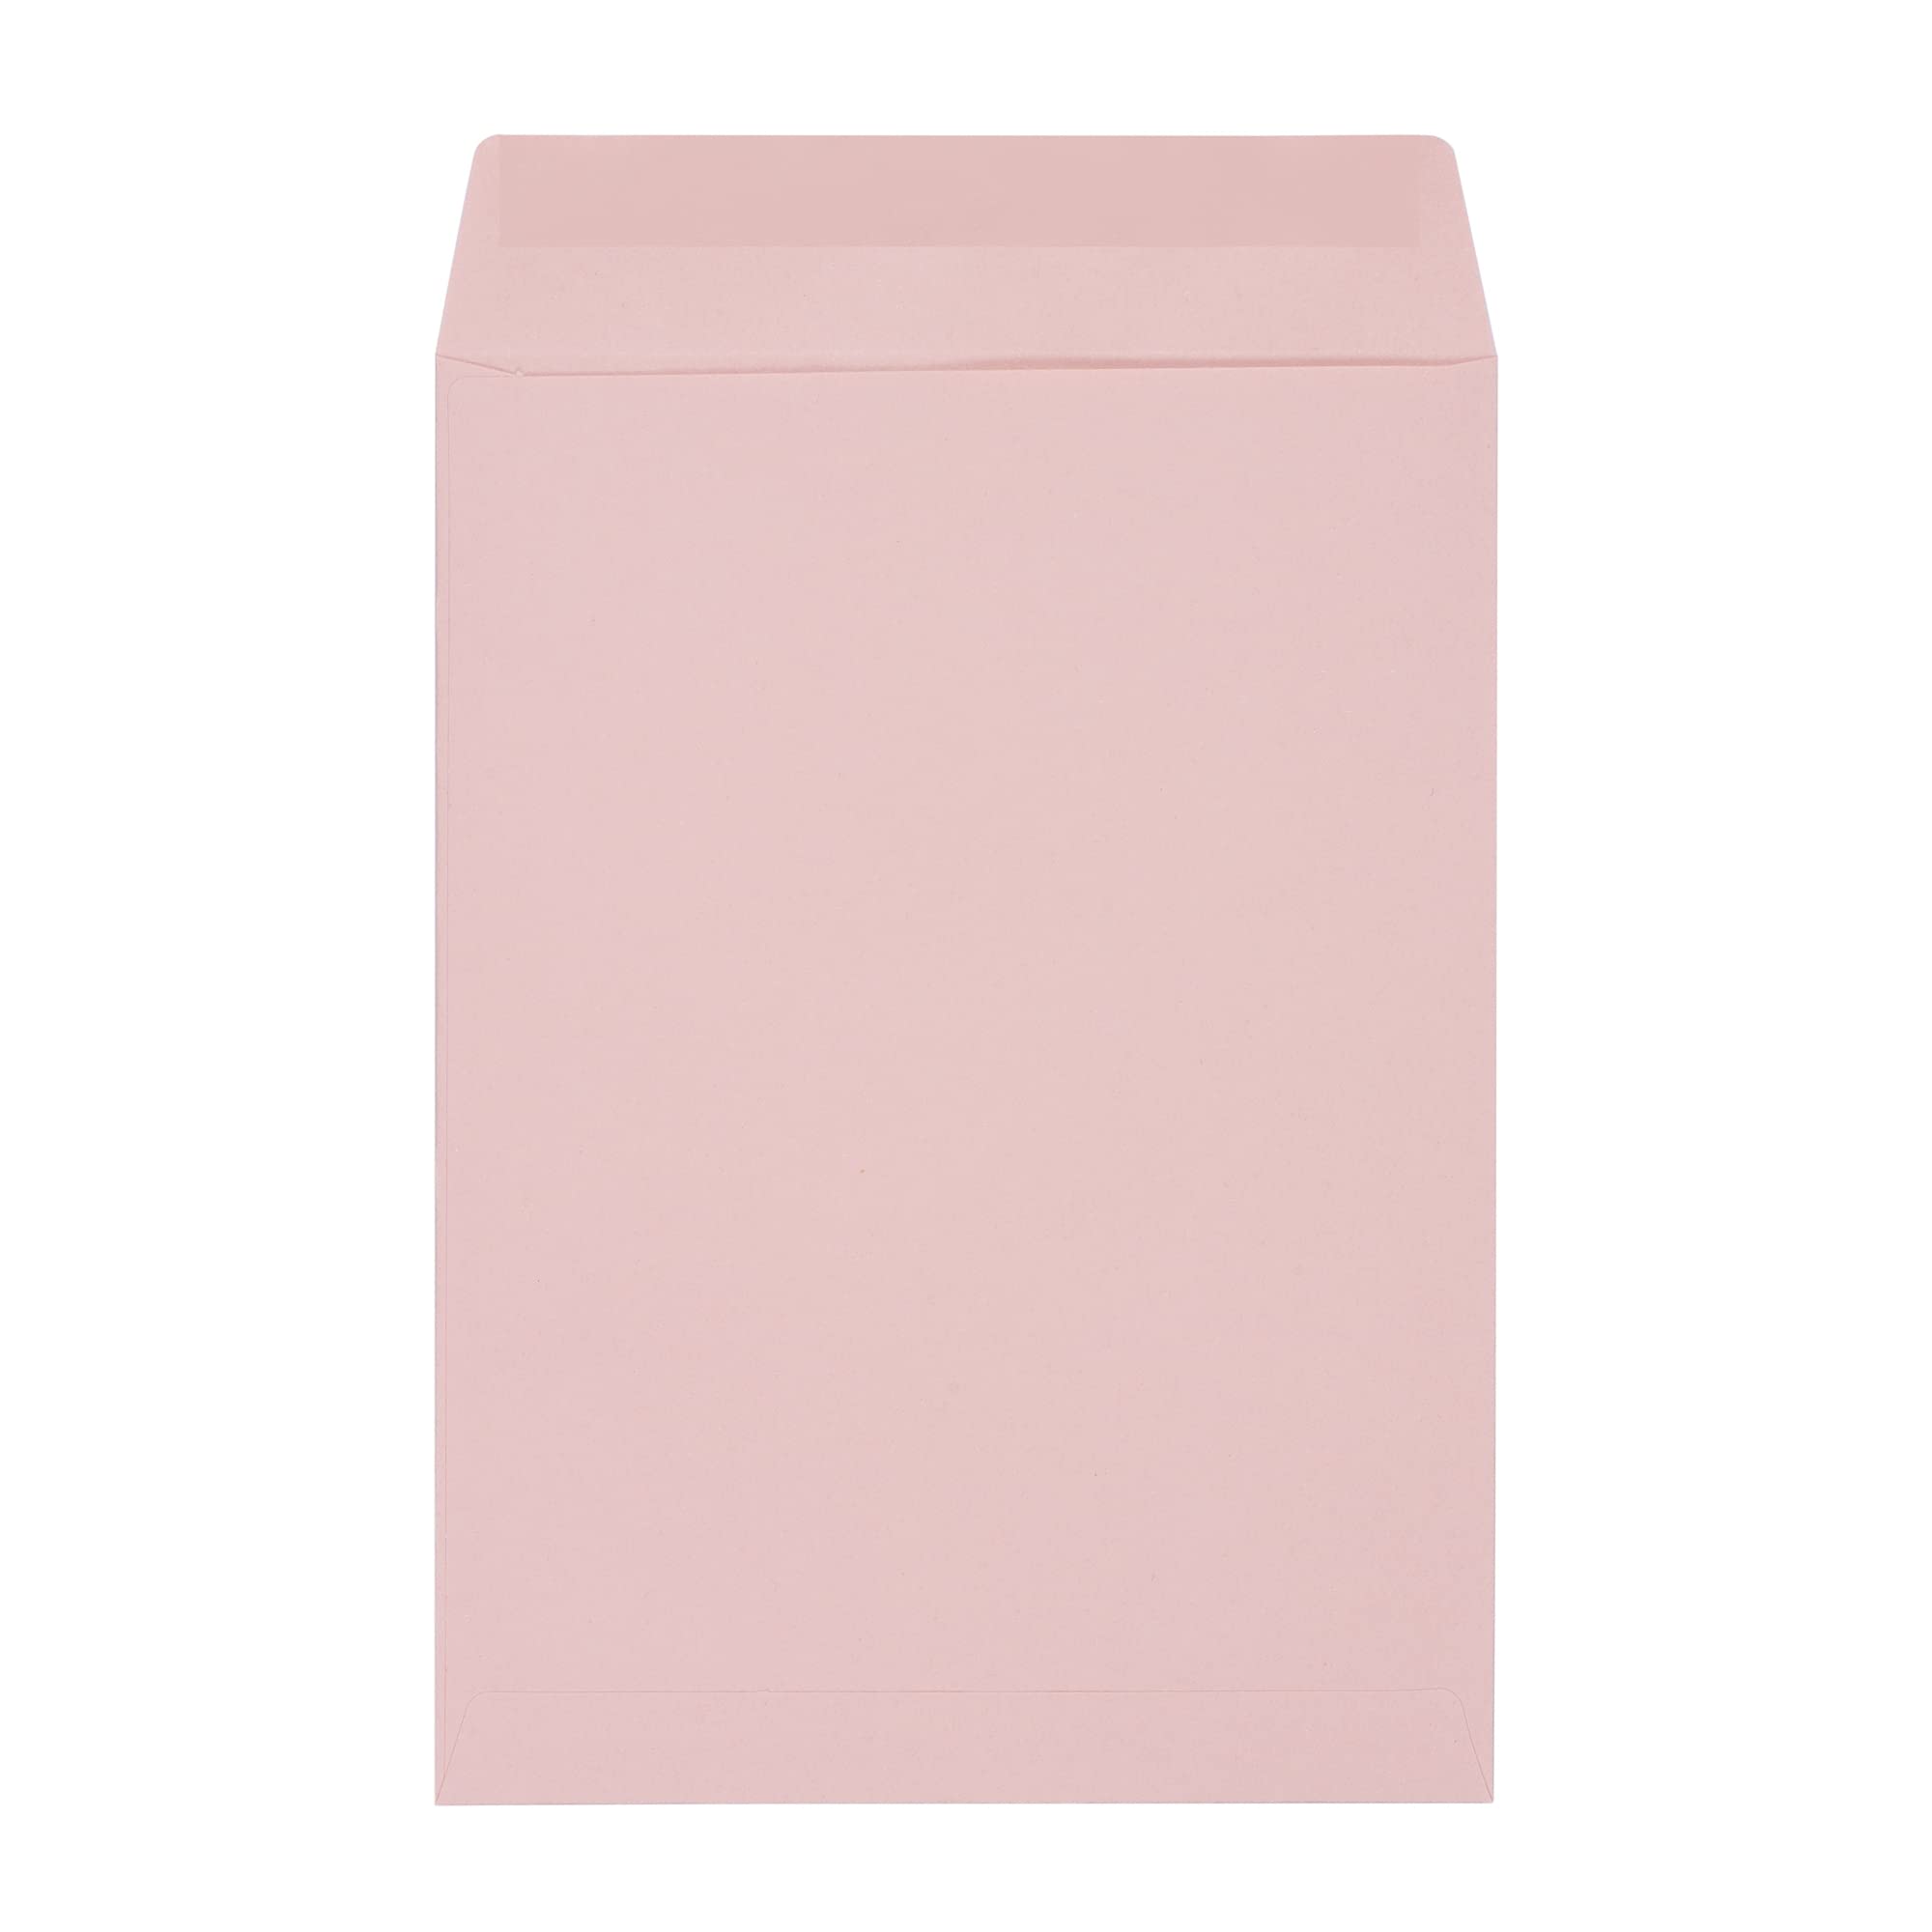 Italy Recycled Pink Paper Bags 4 3/4 x 6 1/2, A6 Envelopes Self Seal for 4x6 Cards Invitations Wedding Confetti Toss Photos Small Business Party Favors Gift Wrapping, 50ct by Quotidian (Pink)